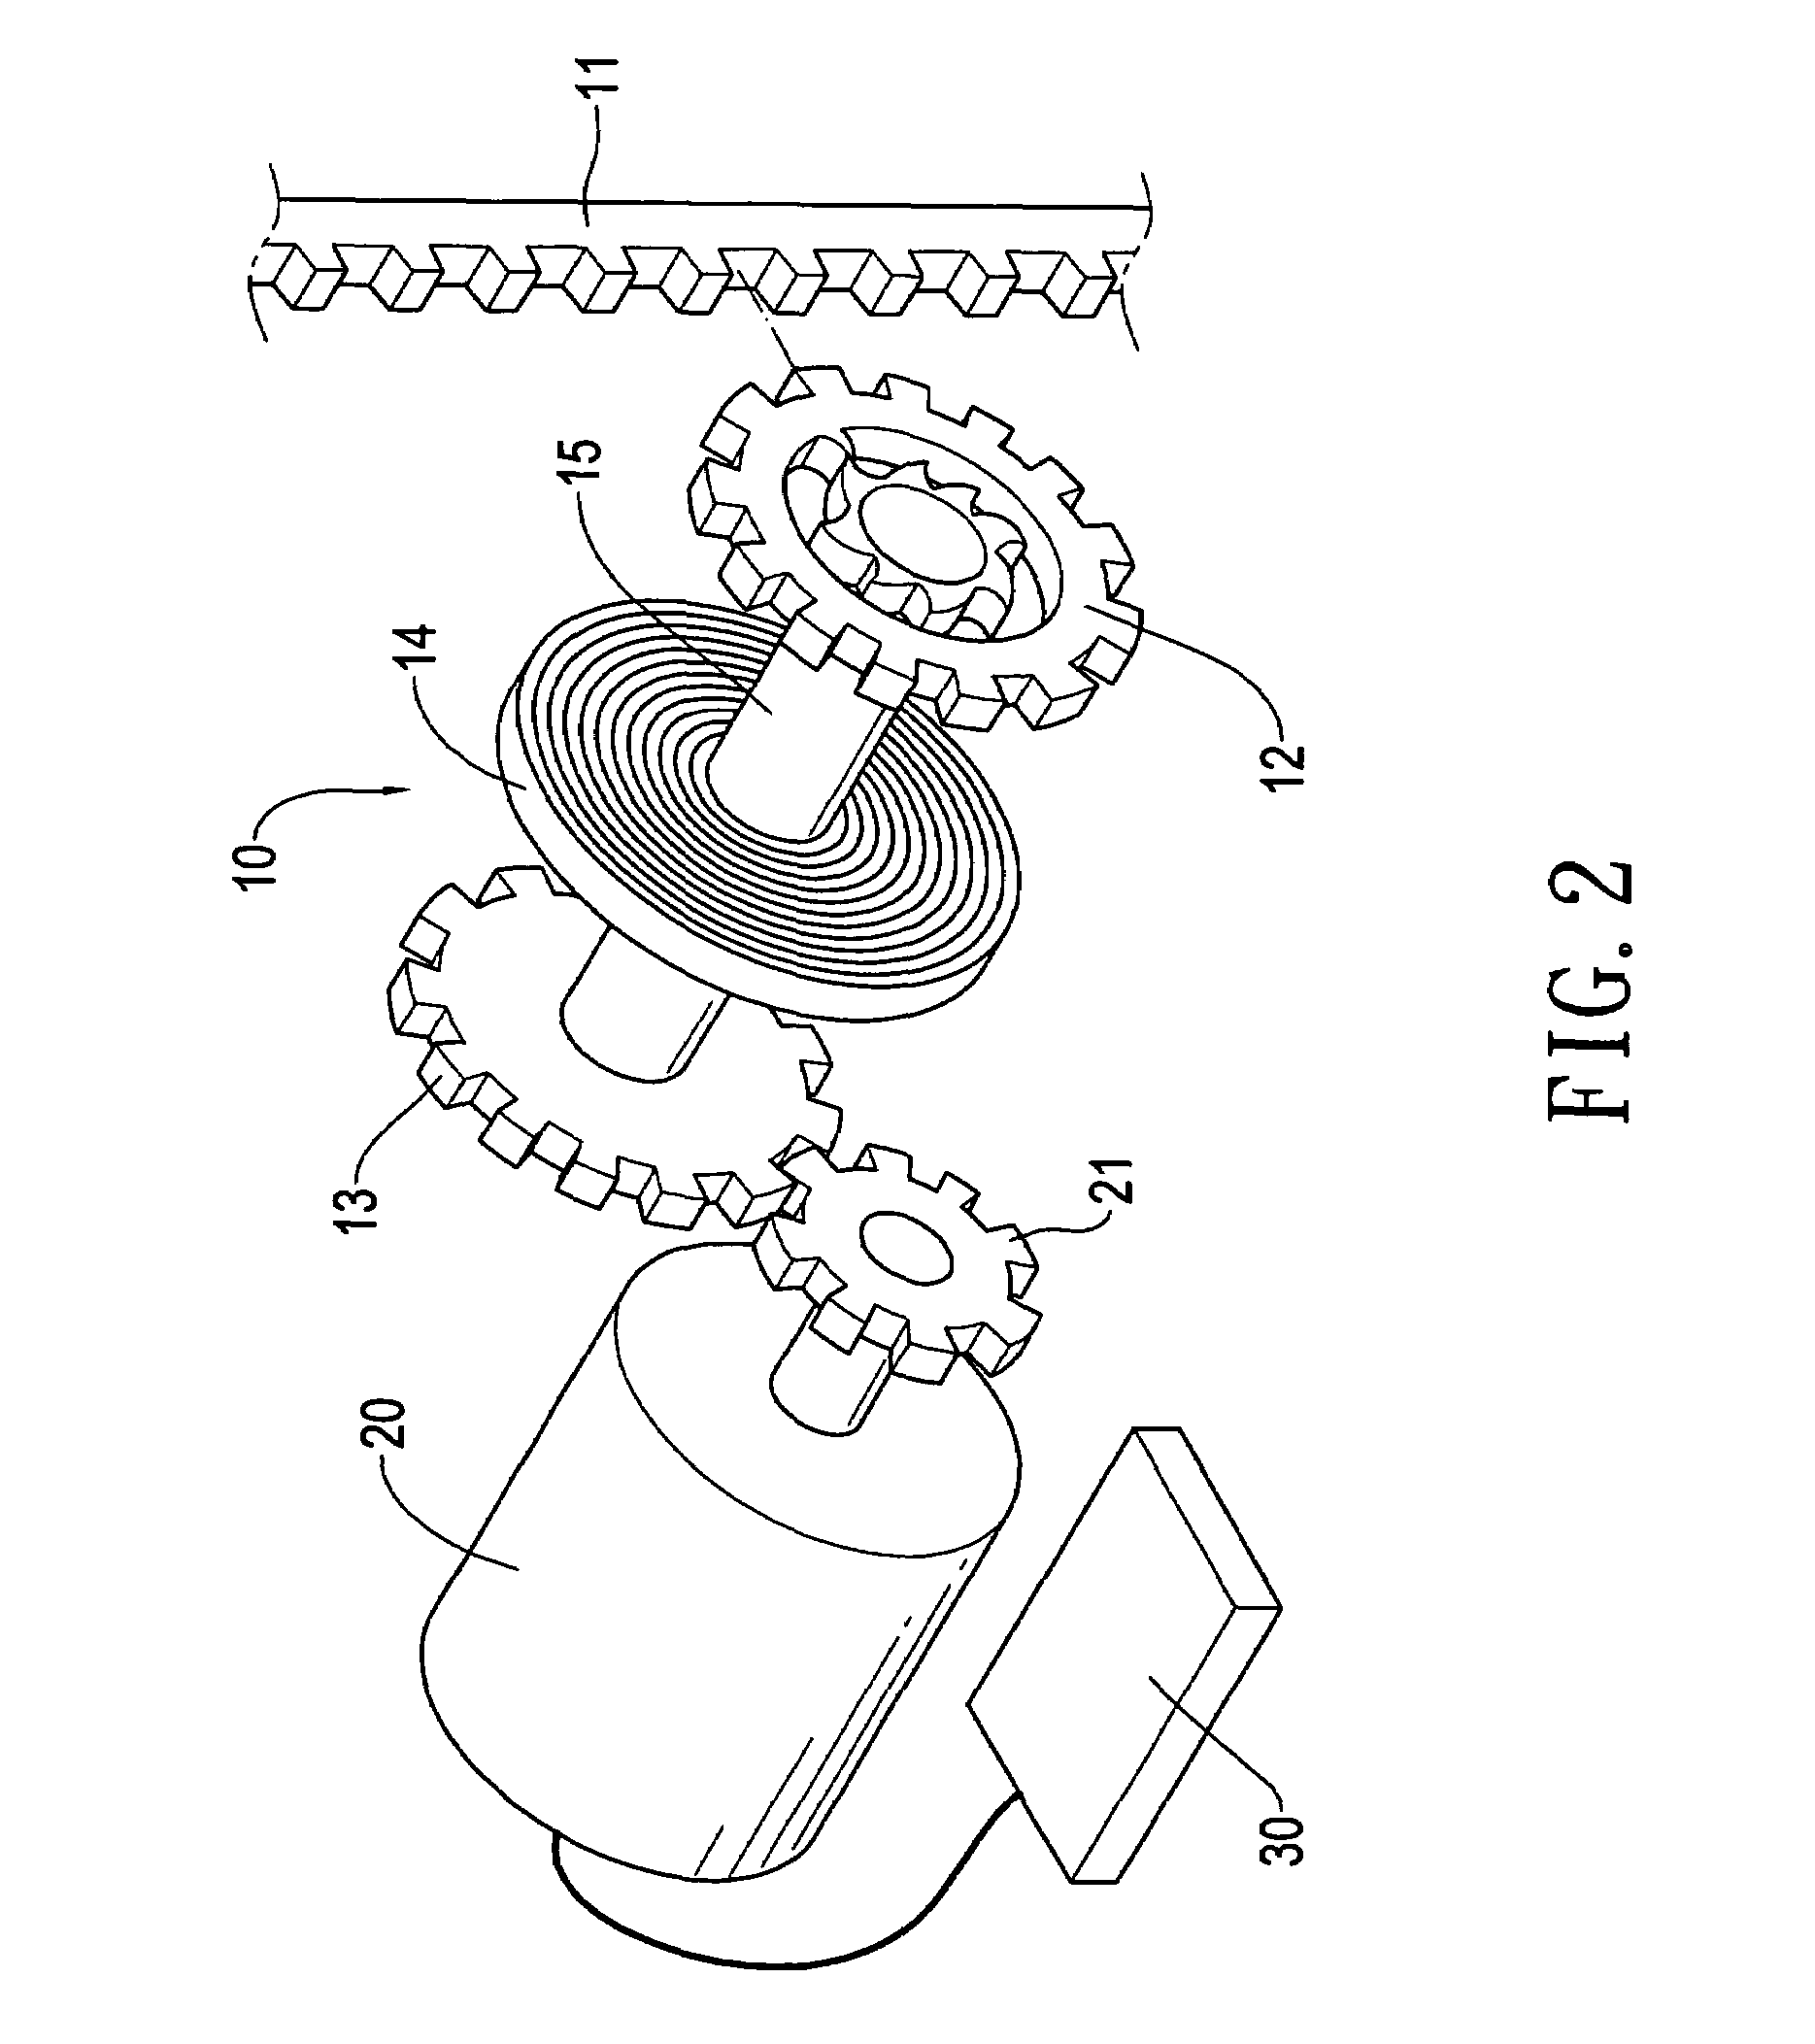 Shock-absorbable electricity-producing apparatus